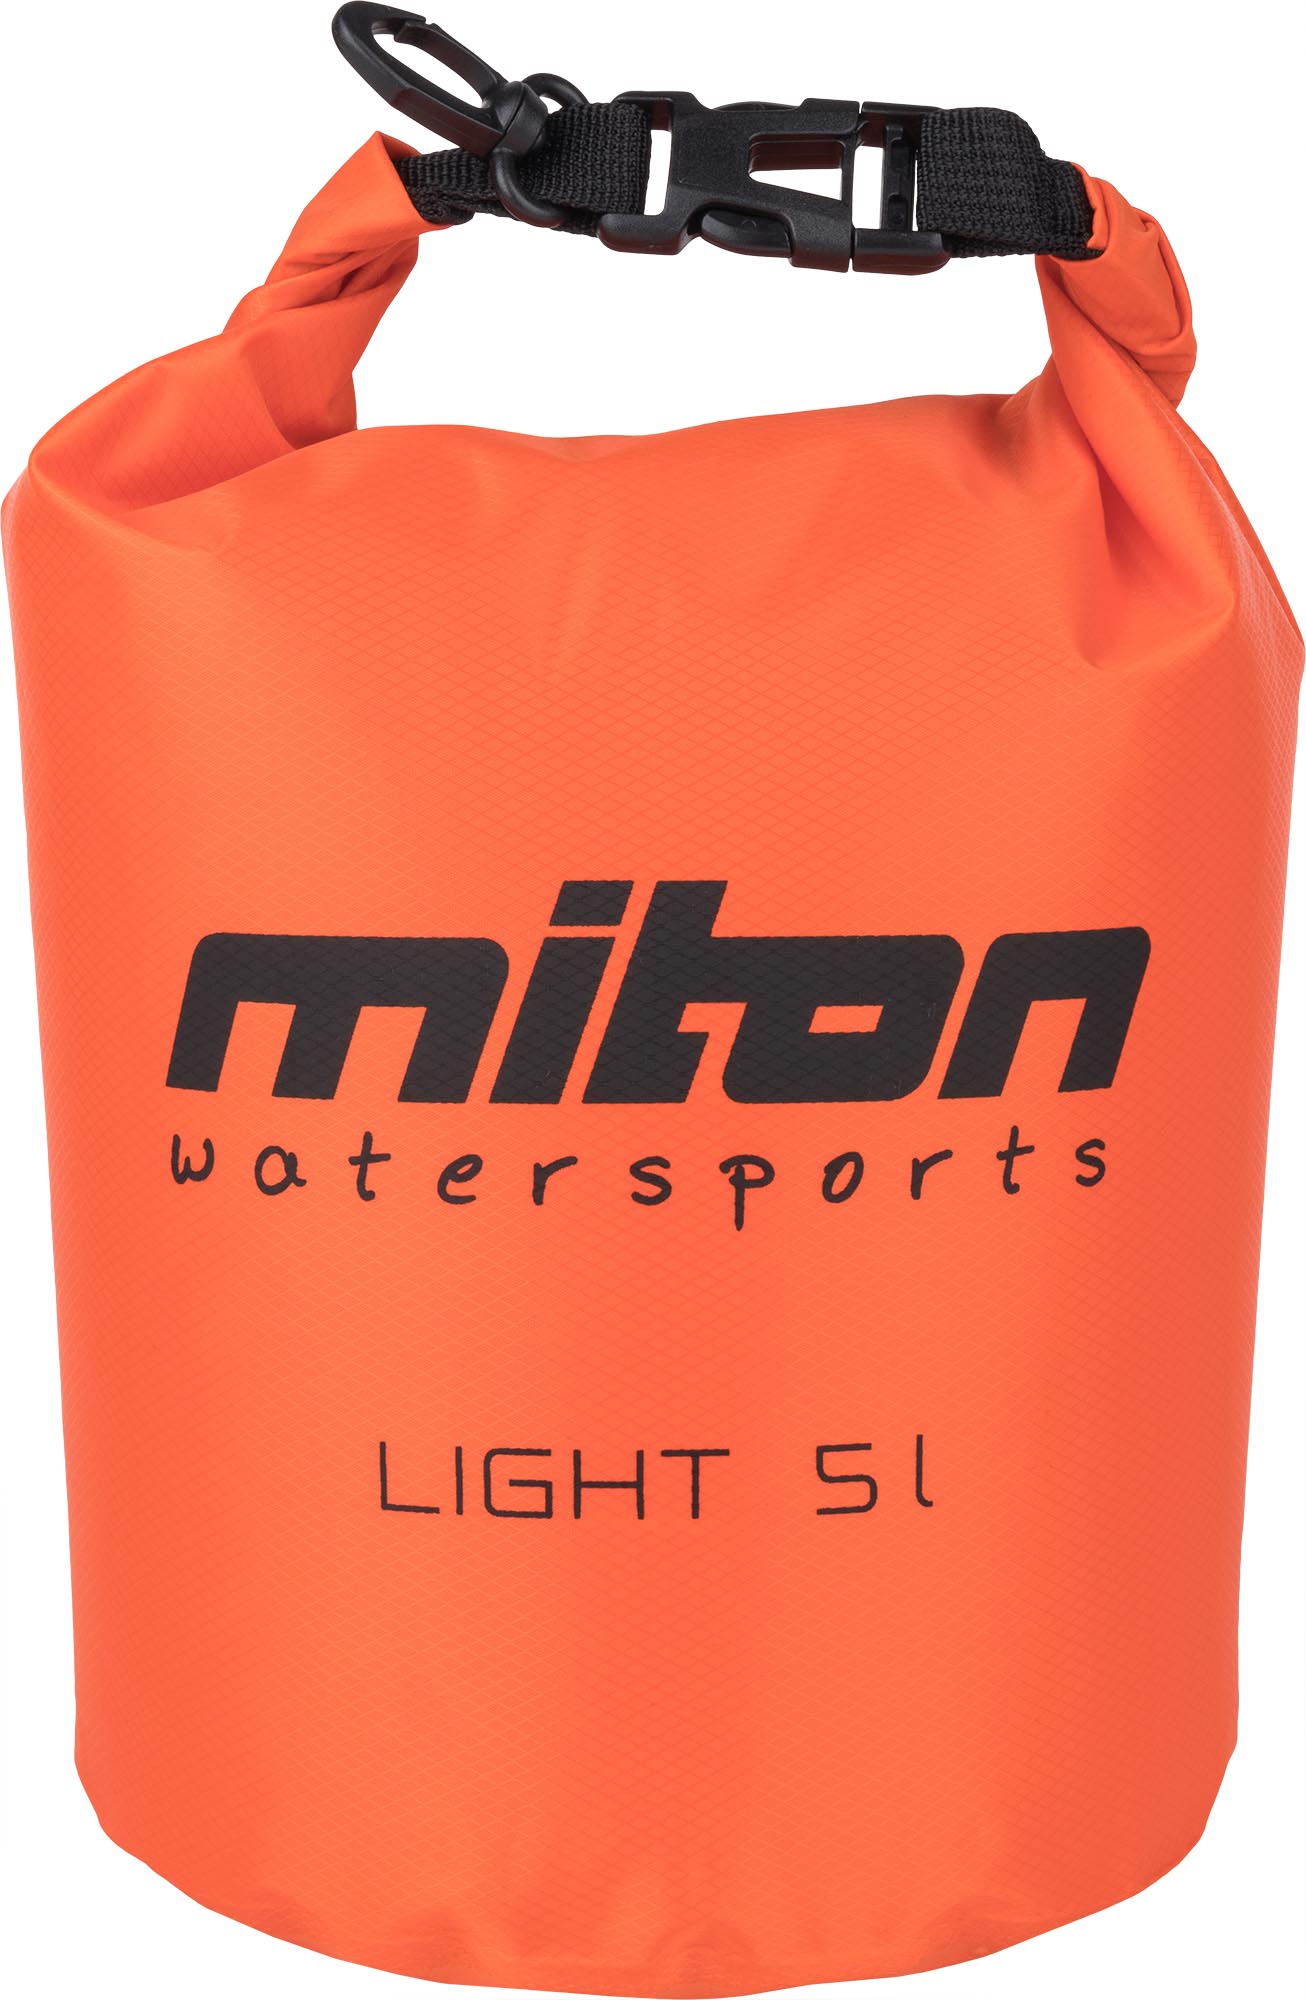 Watertight bag with roll-top